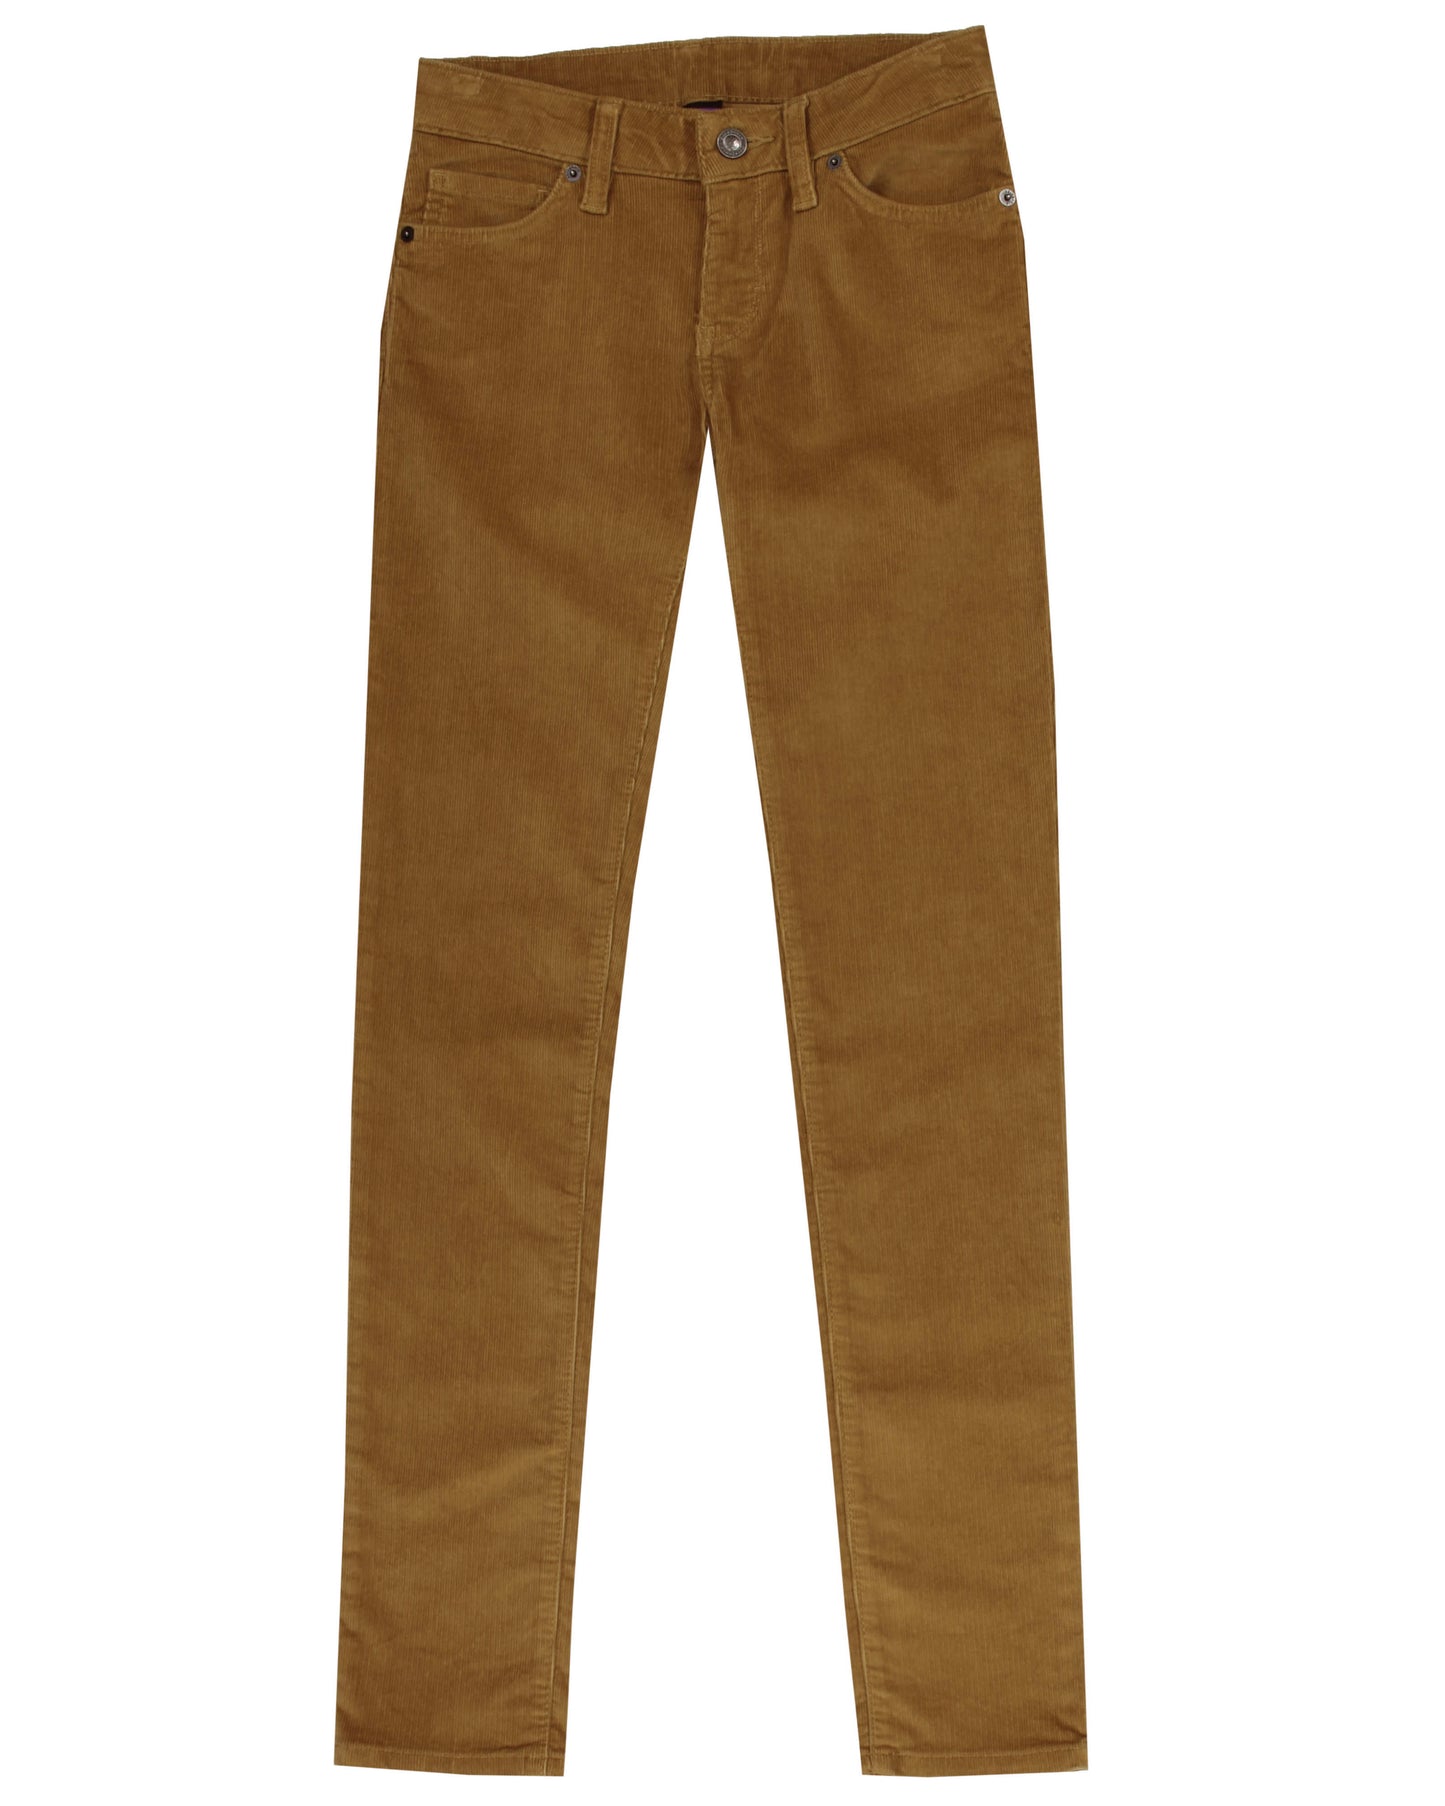 Women's Fitted Corduroy Pants